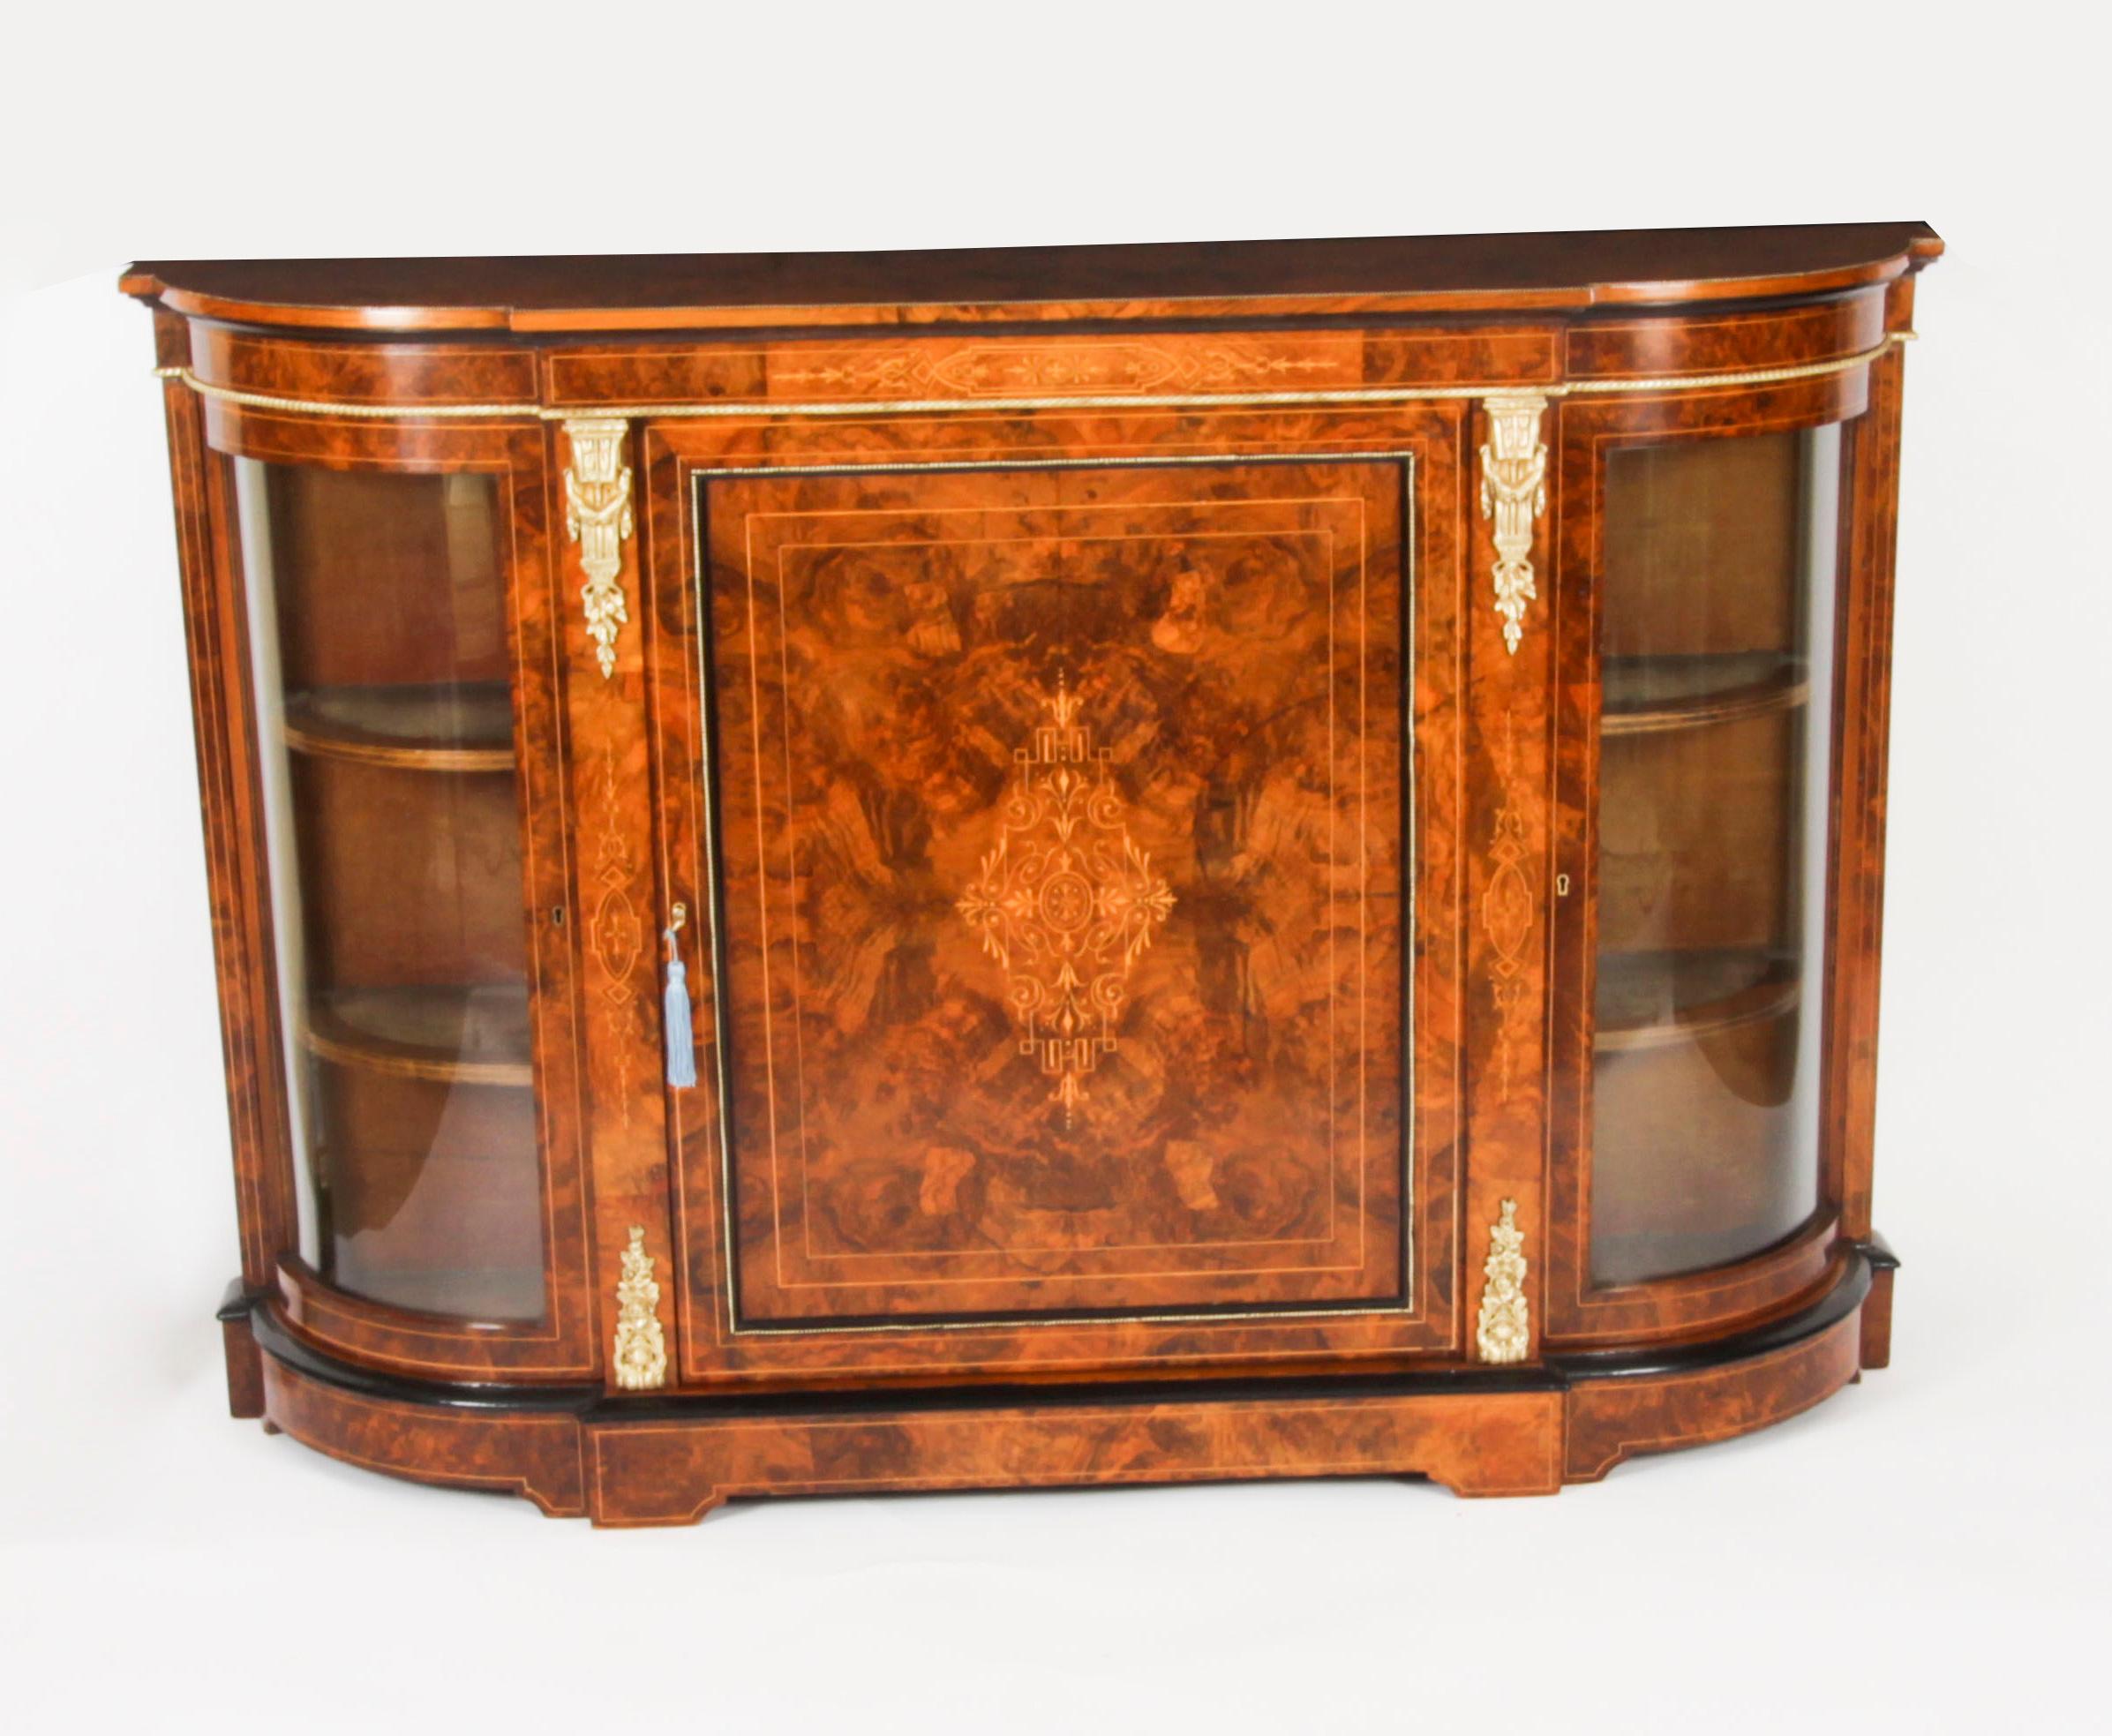 This is an exceptional quality  antique Victorian ormolu mounted burr walnut, ebonised  and marquetry inlaid scredenza, circa 1860 in date.

The entire piece highlights the unique and truly exceptional pattern of the book matched burr walnut veneers